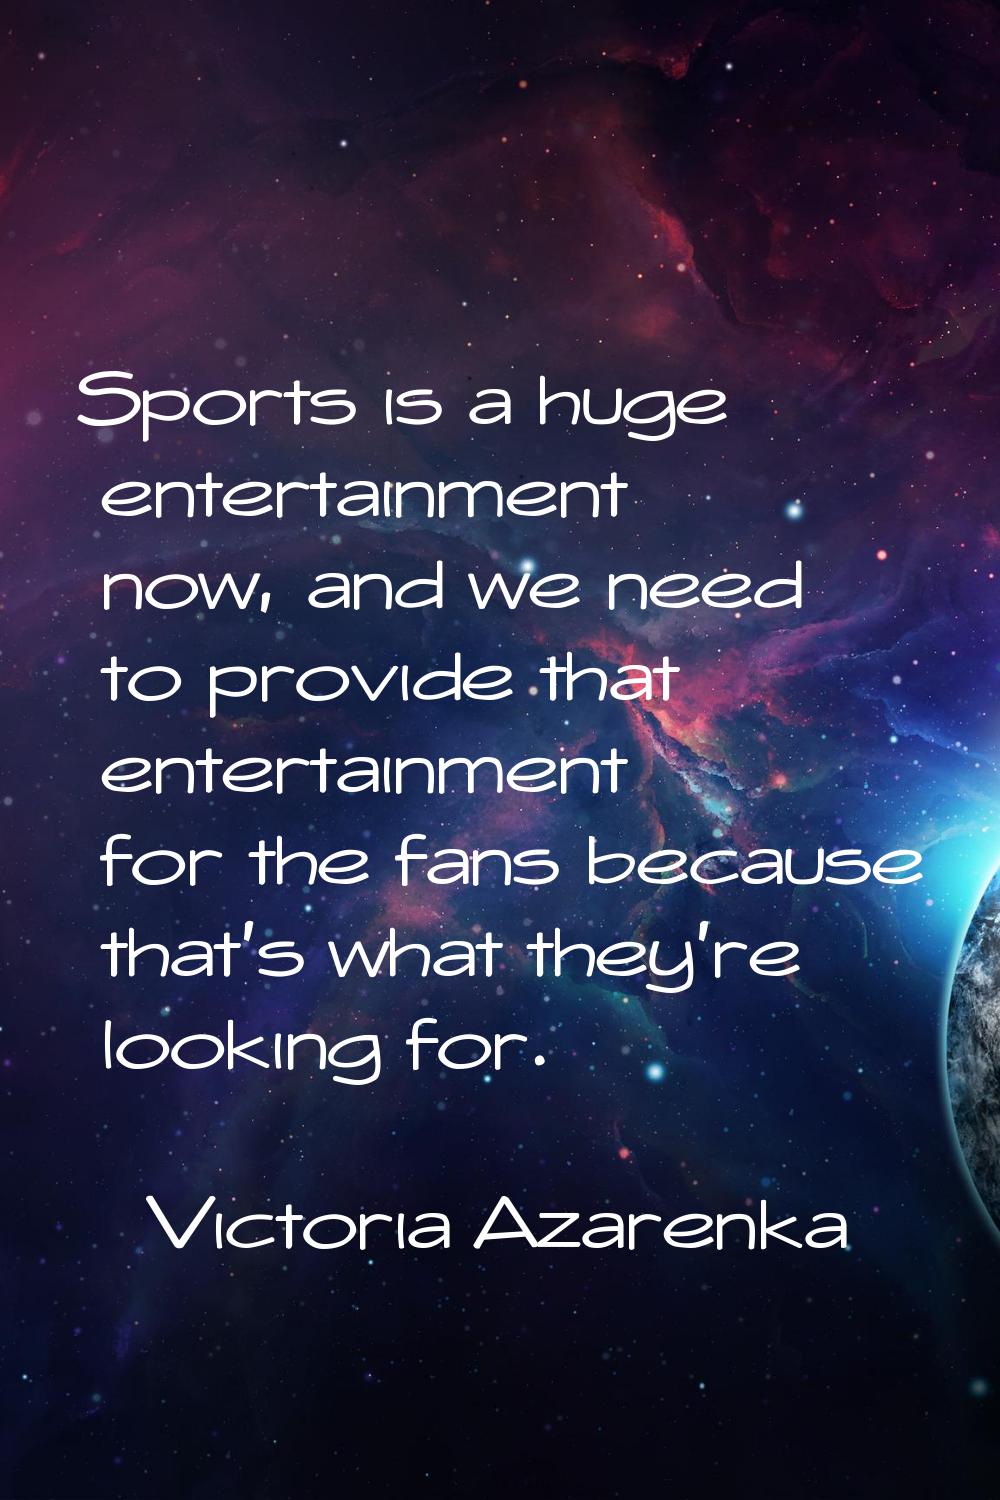 Sports is a huge entertainment now, and we need to provide that entertainment for the fans because 